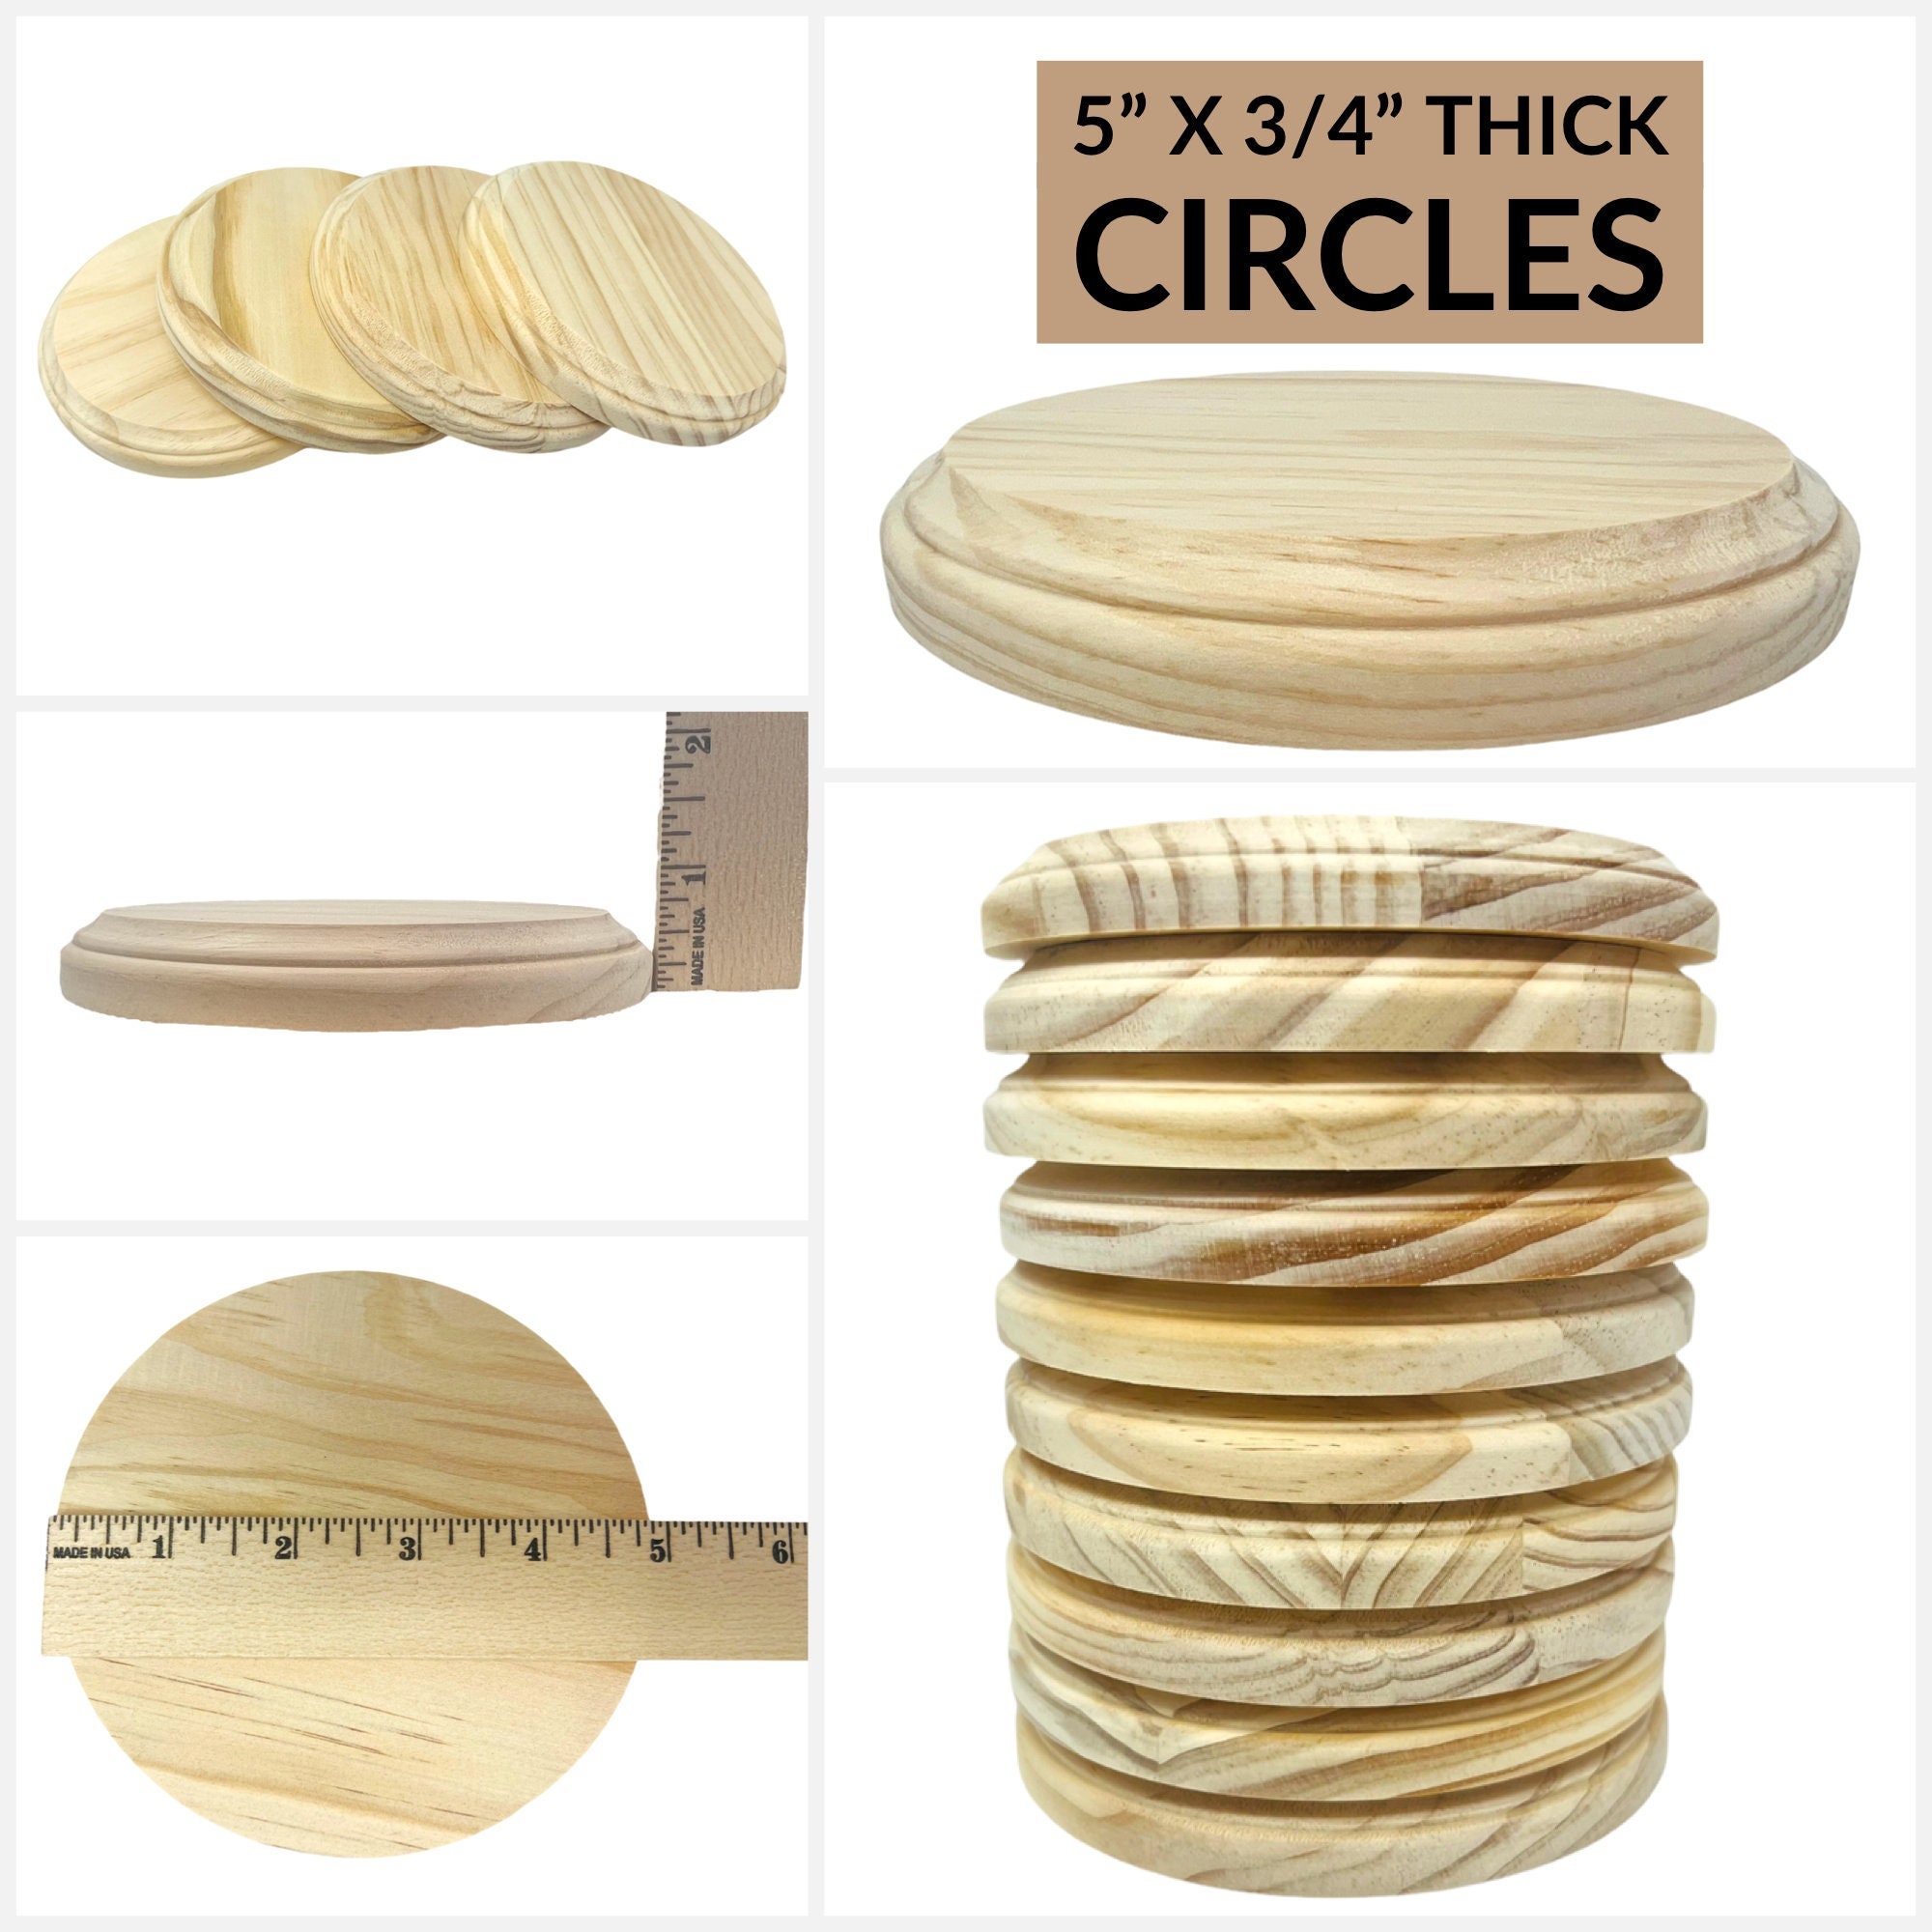 Caydo 4 Pieces 7-8 Inch Wood Slices for Centerpieces Natural Round